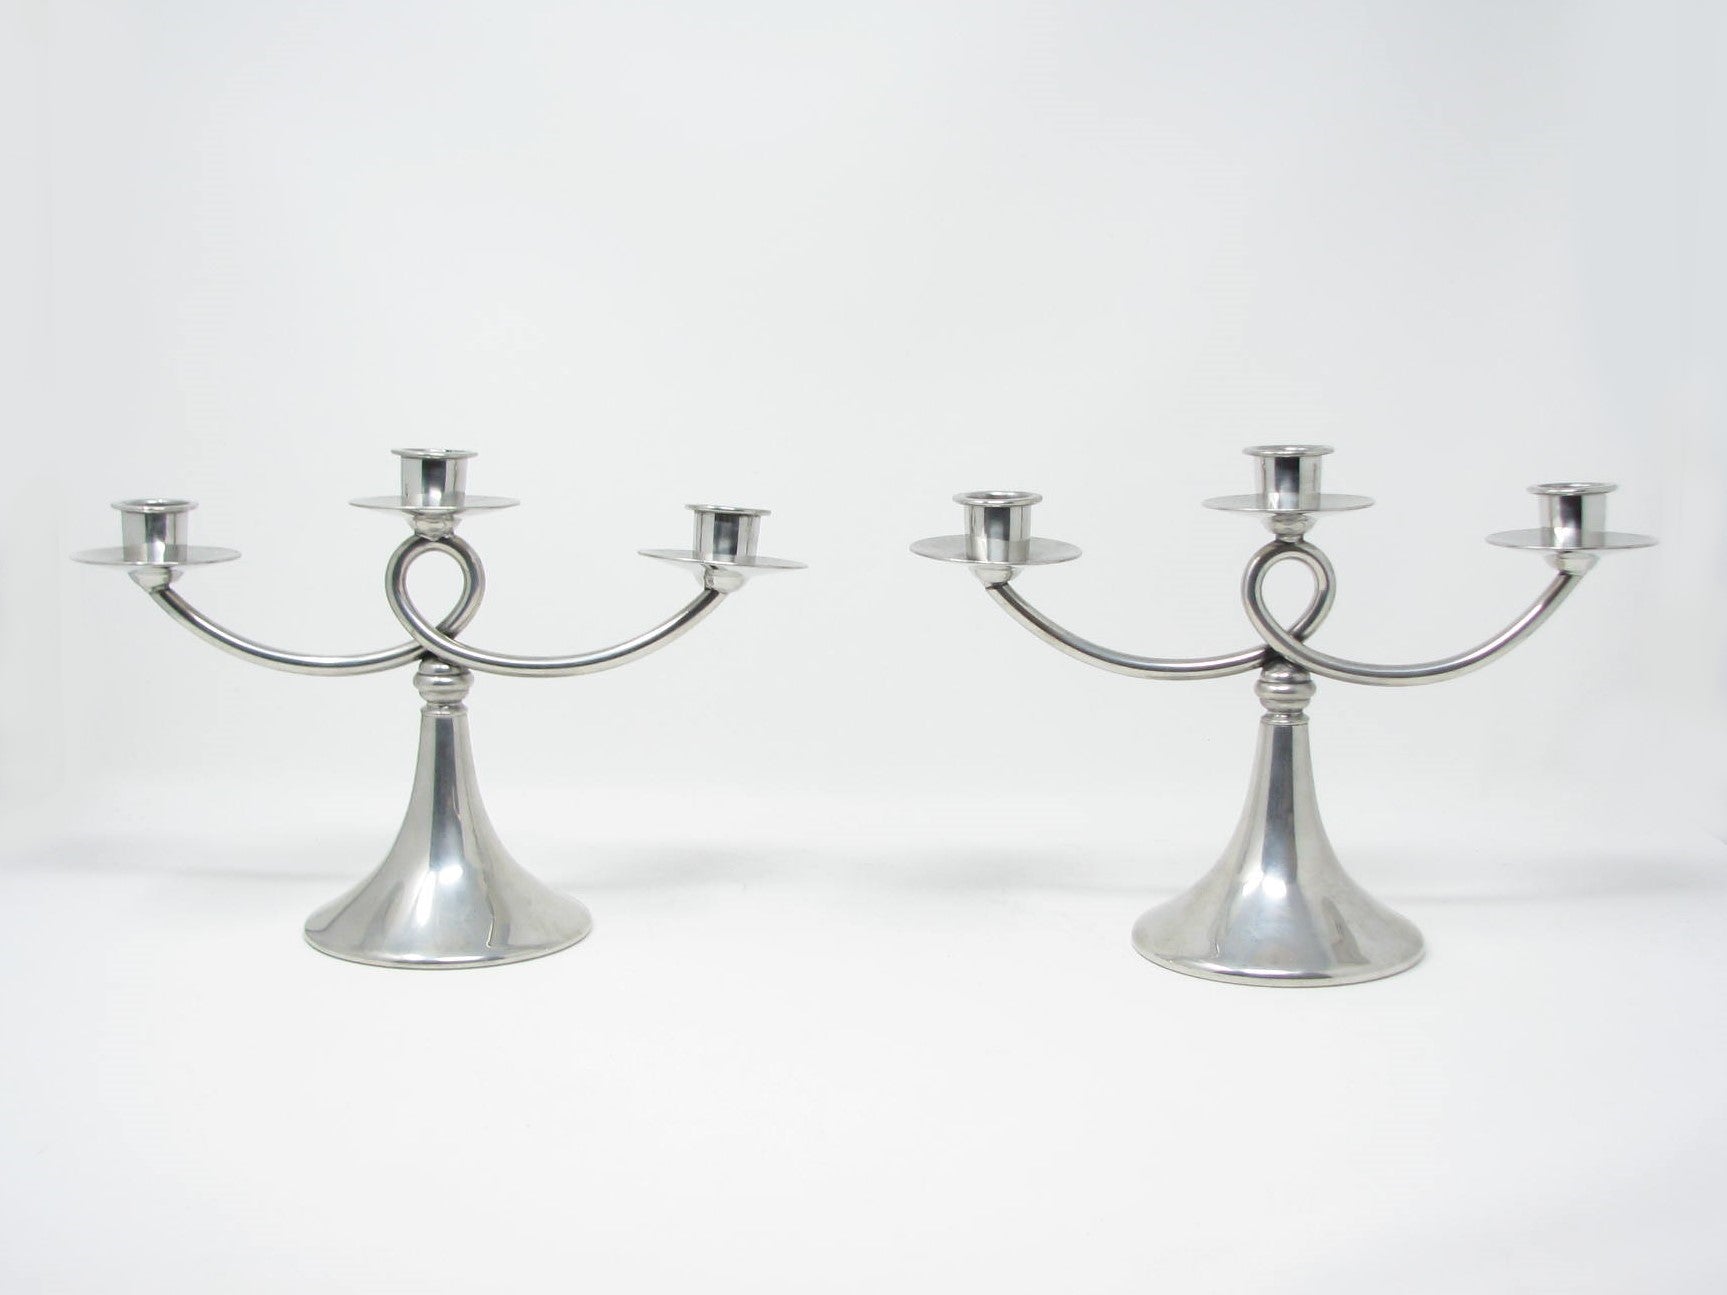 edgebrookhouse - Antique Art Deco Plymouth KS Pewter Candelabra Candle Holders USA - a Pair